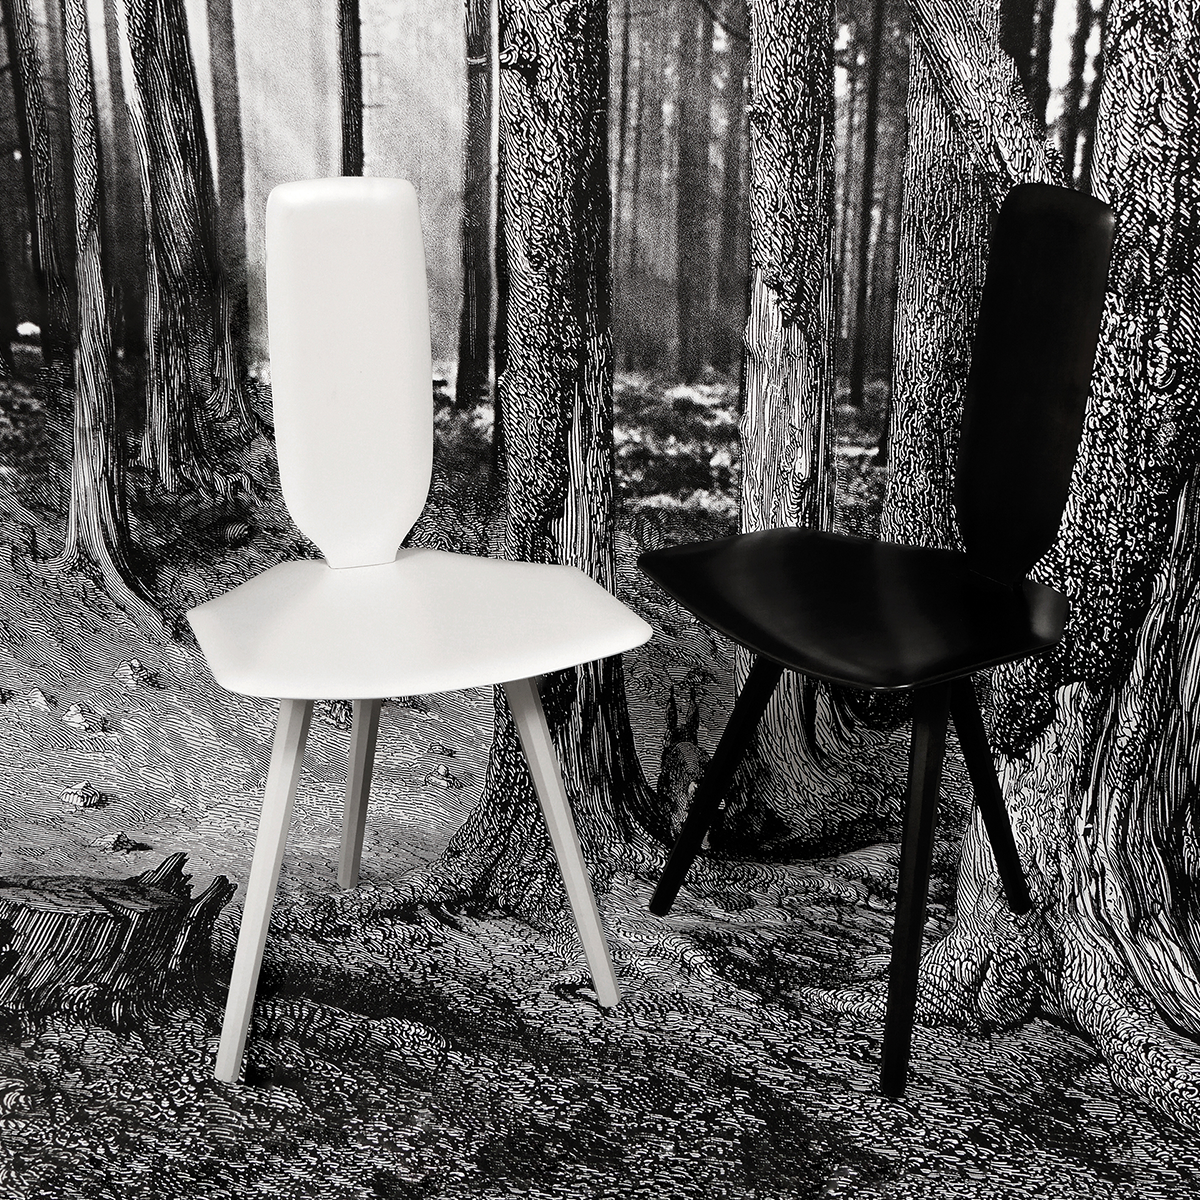 Bavaresk High dining chair by Christophe de la Fontaine for DANTE - Goods and Bads